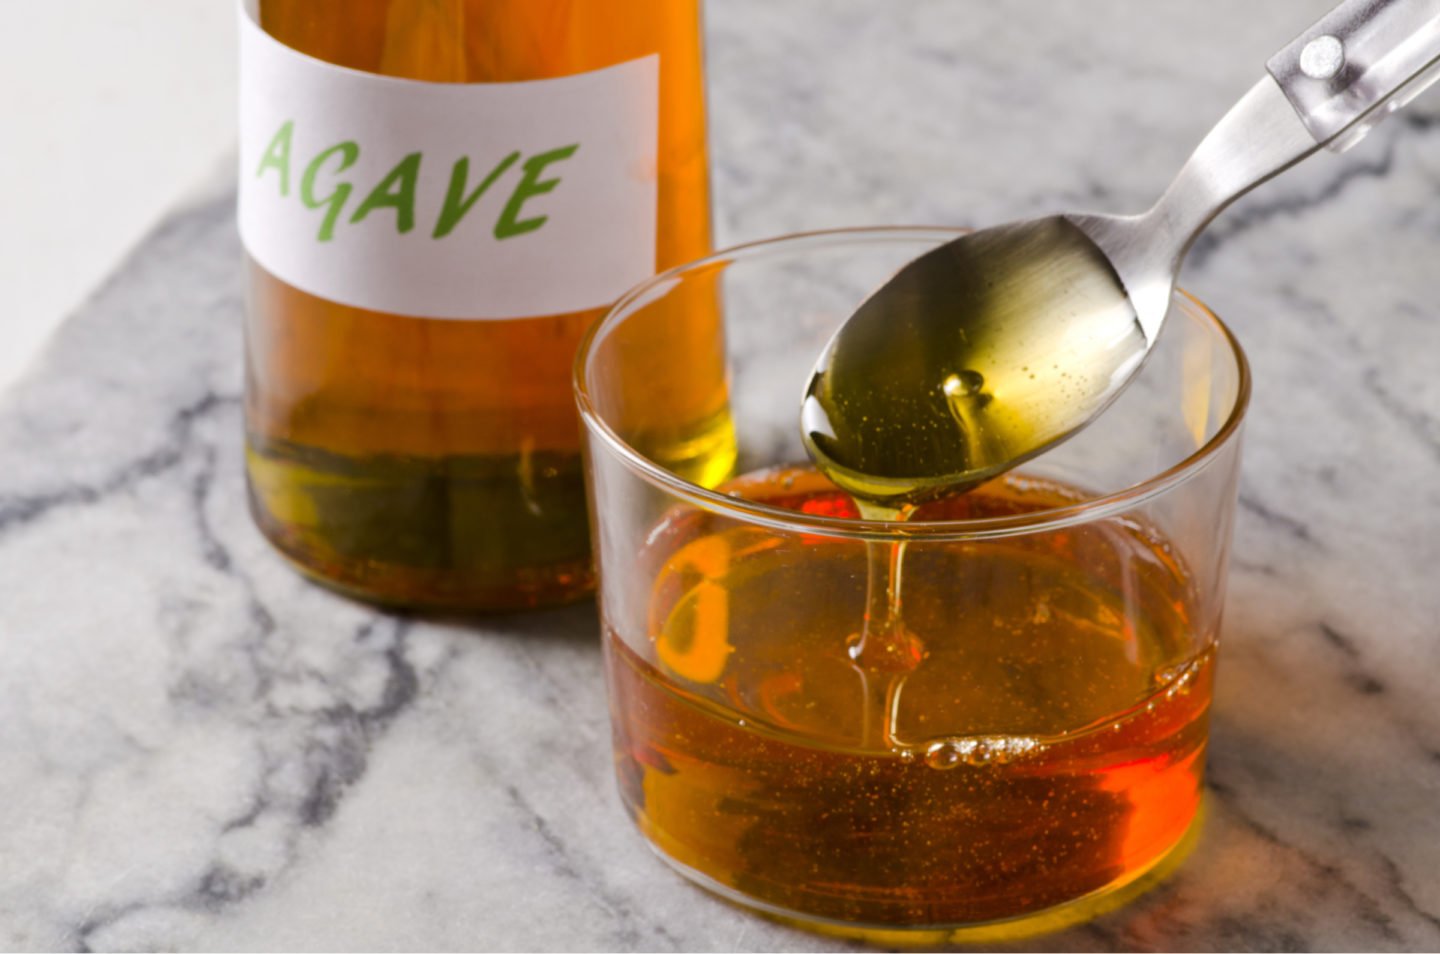 agave syrup in bottle and bowl